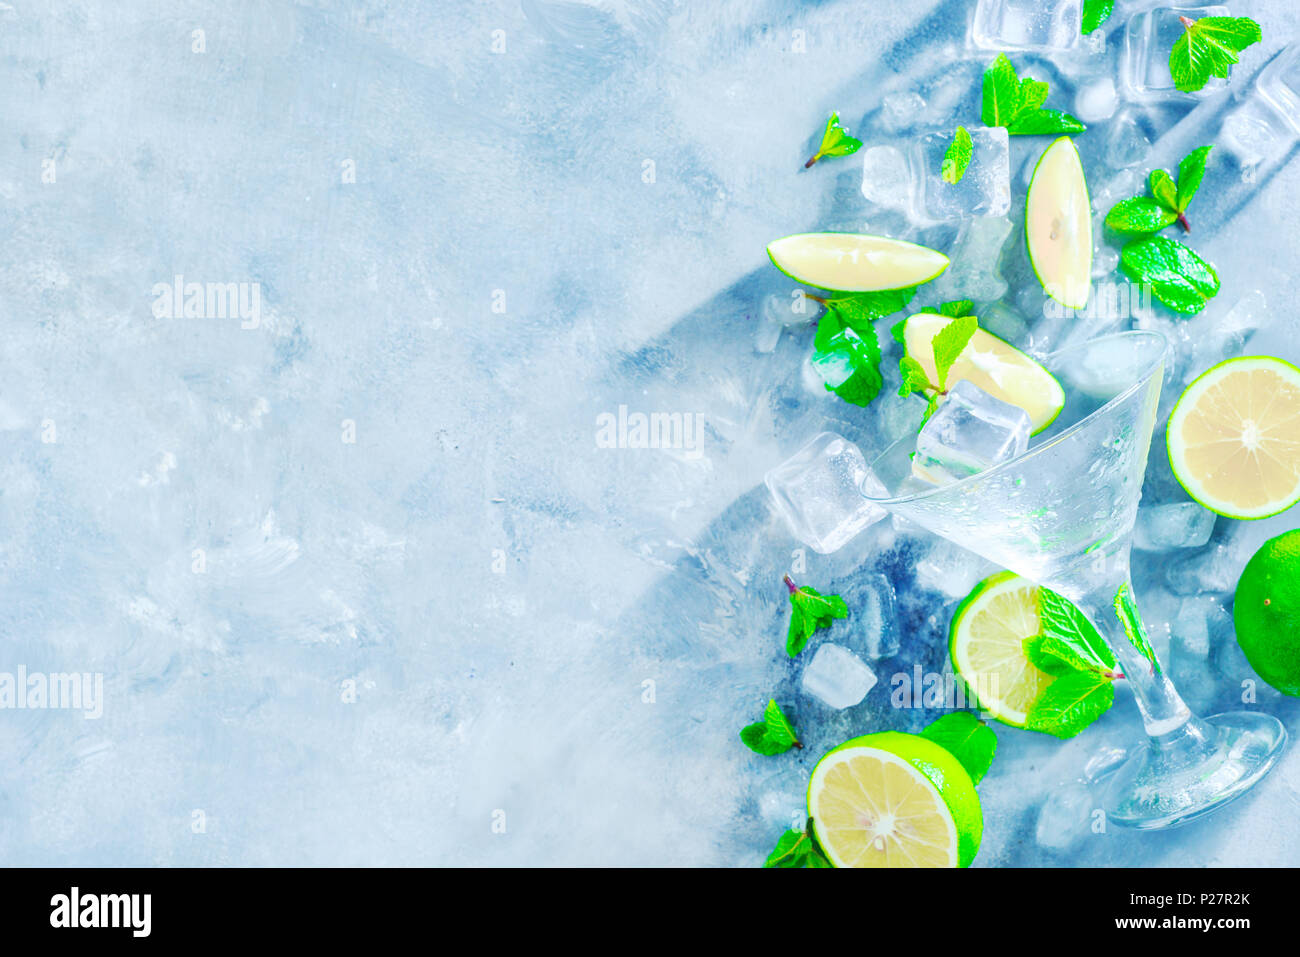 Mint, lime and ice cubes, mojito cocktail ingredients header with copy space. Making summer drinks close-up. Sunlight and refreshment concept. Stock Photo